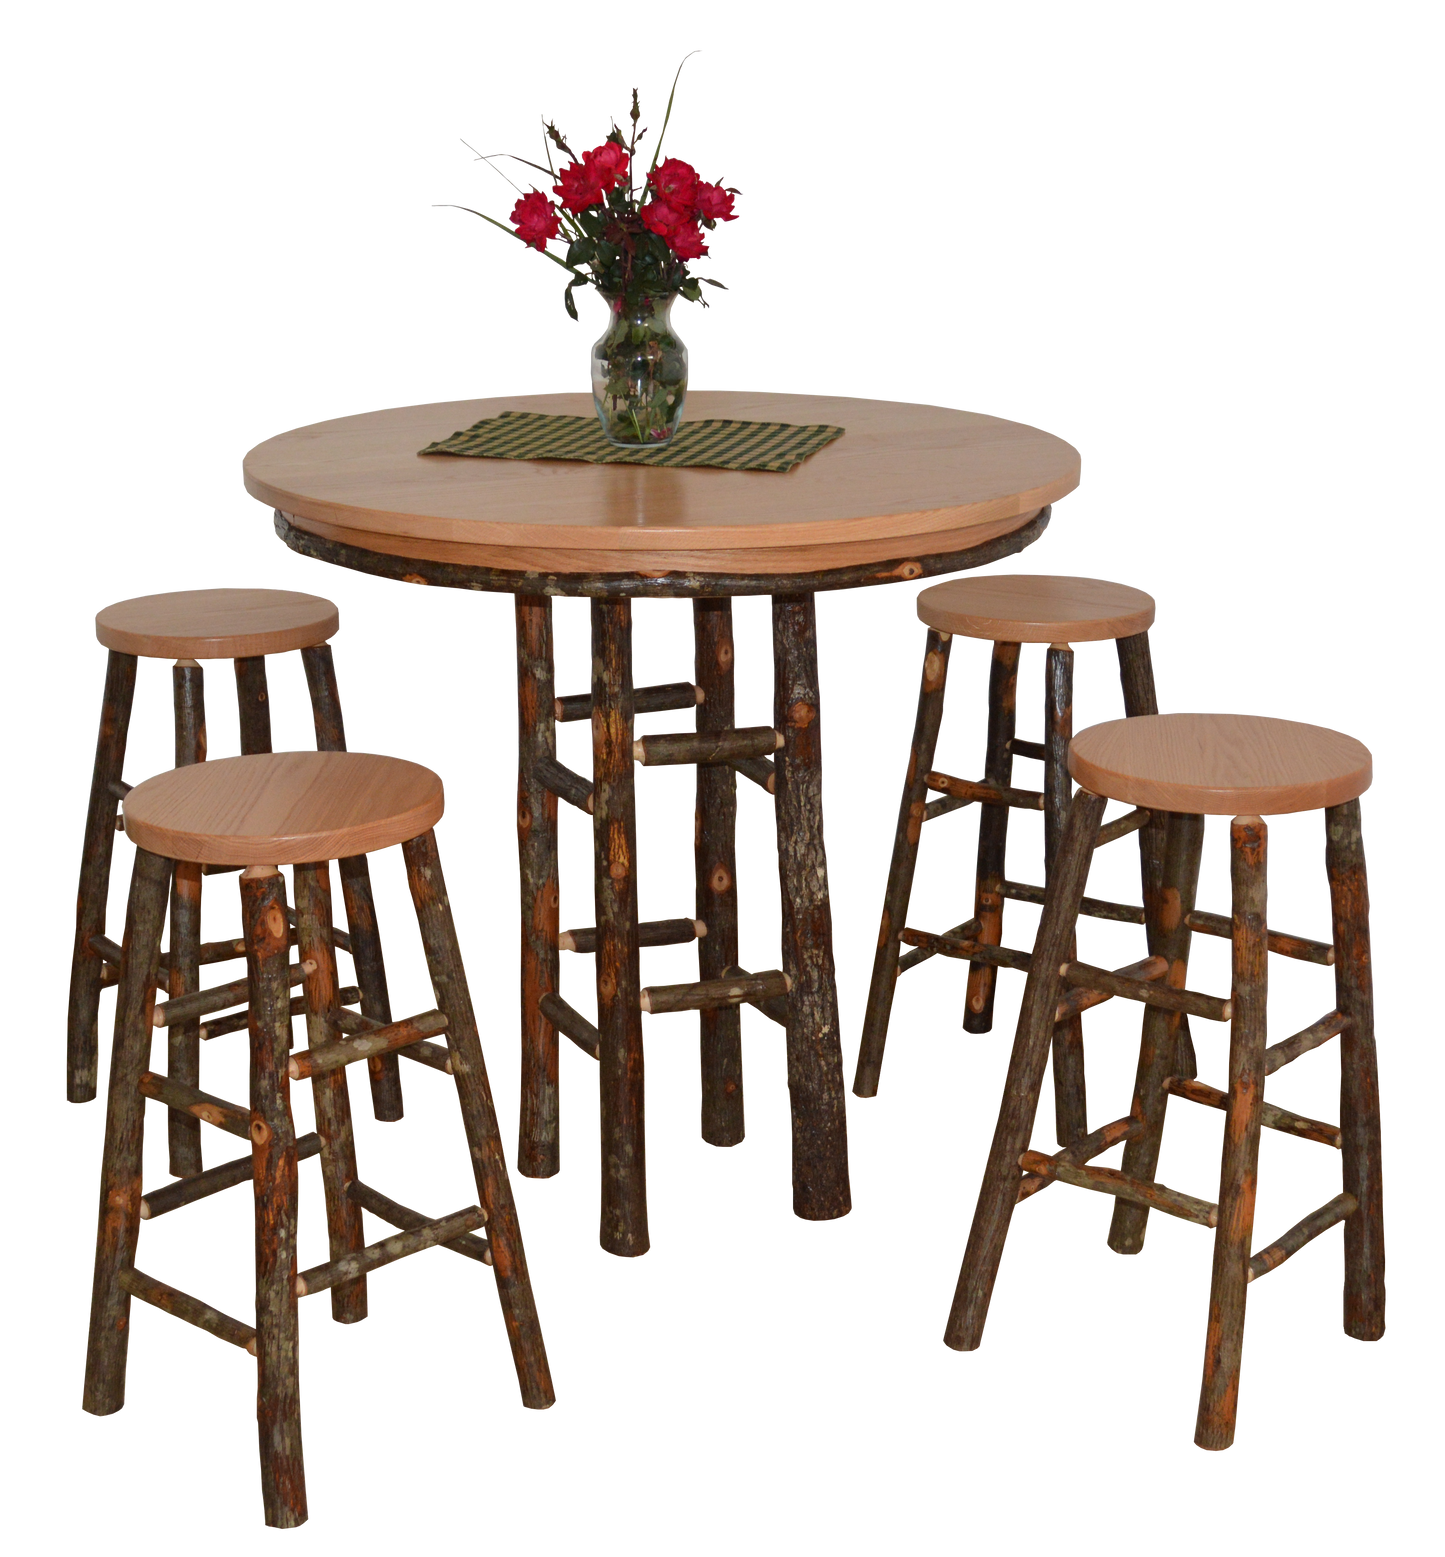 A&L Furniture Co. 42" Round Hickory Bar Table - LEAD TIME TO SHIP 10 BUSINESS DAYS